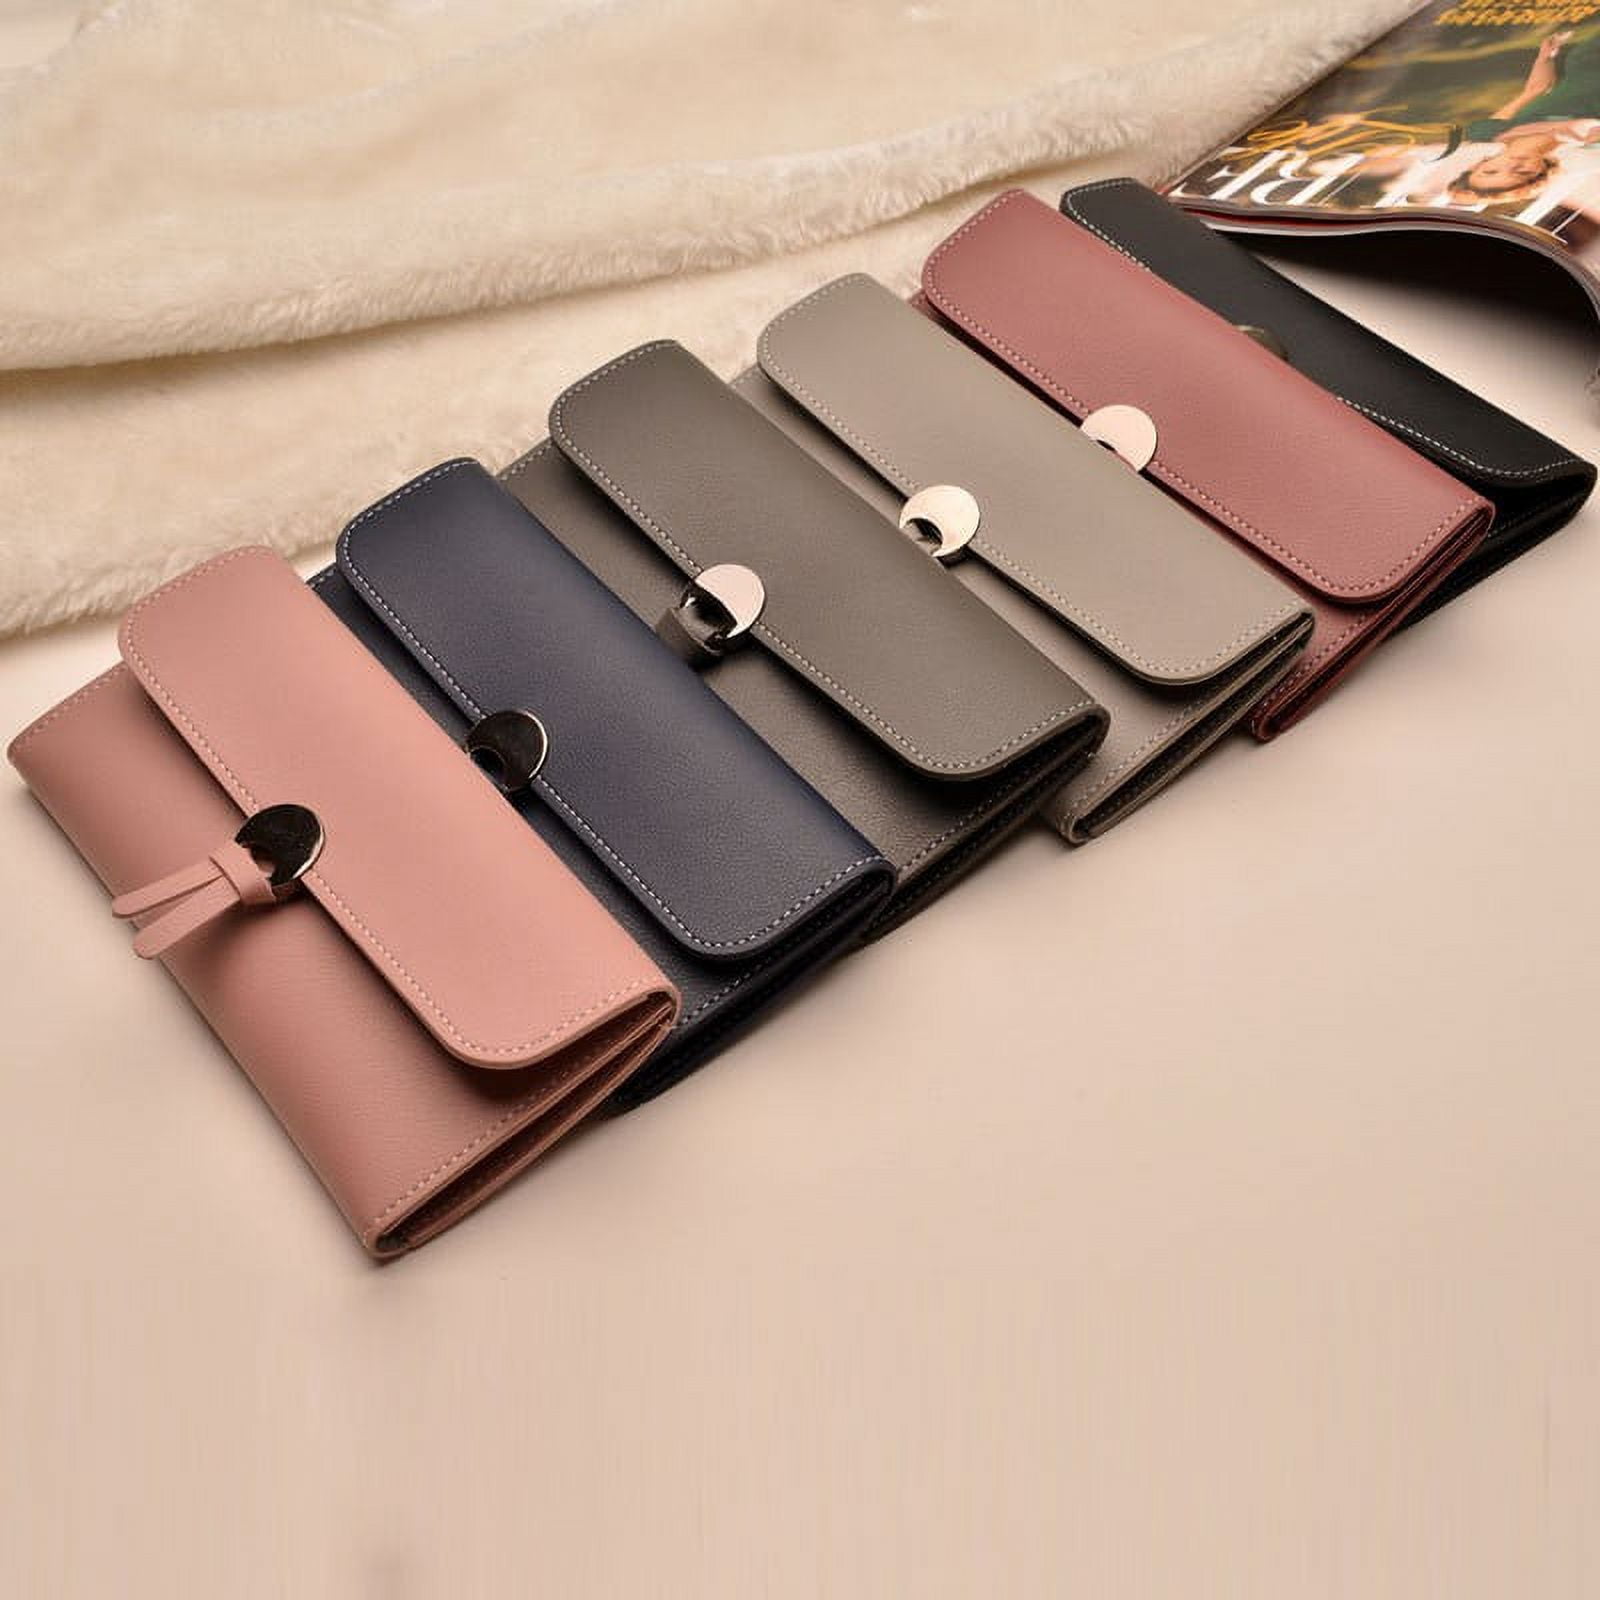  Ladies Wallet Long Clutch Purse Small and Light Simple and  Elegant Design for Girls Ladies Shopping Dating : Clothing, Shoes & Jewelry